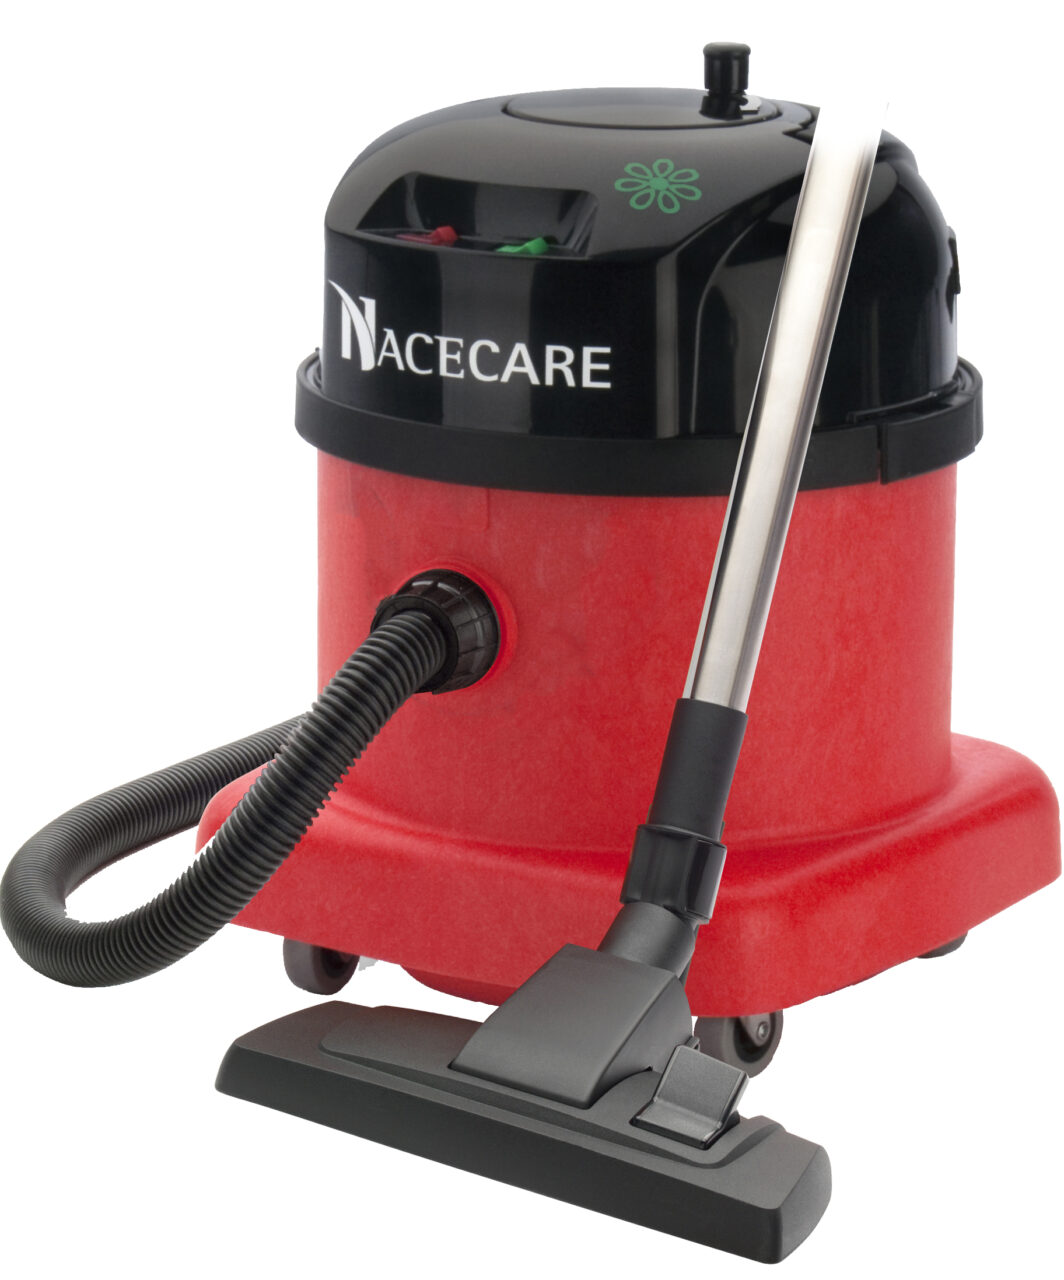 Nacecare PPR380 Canister Vacuum Cleaner